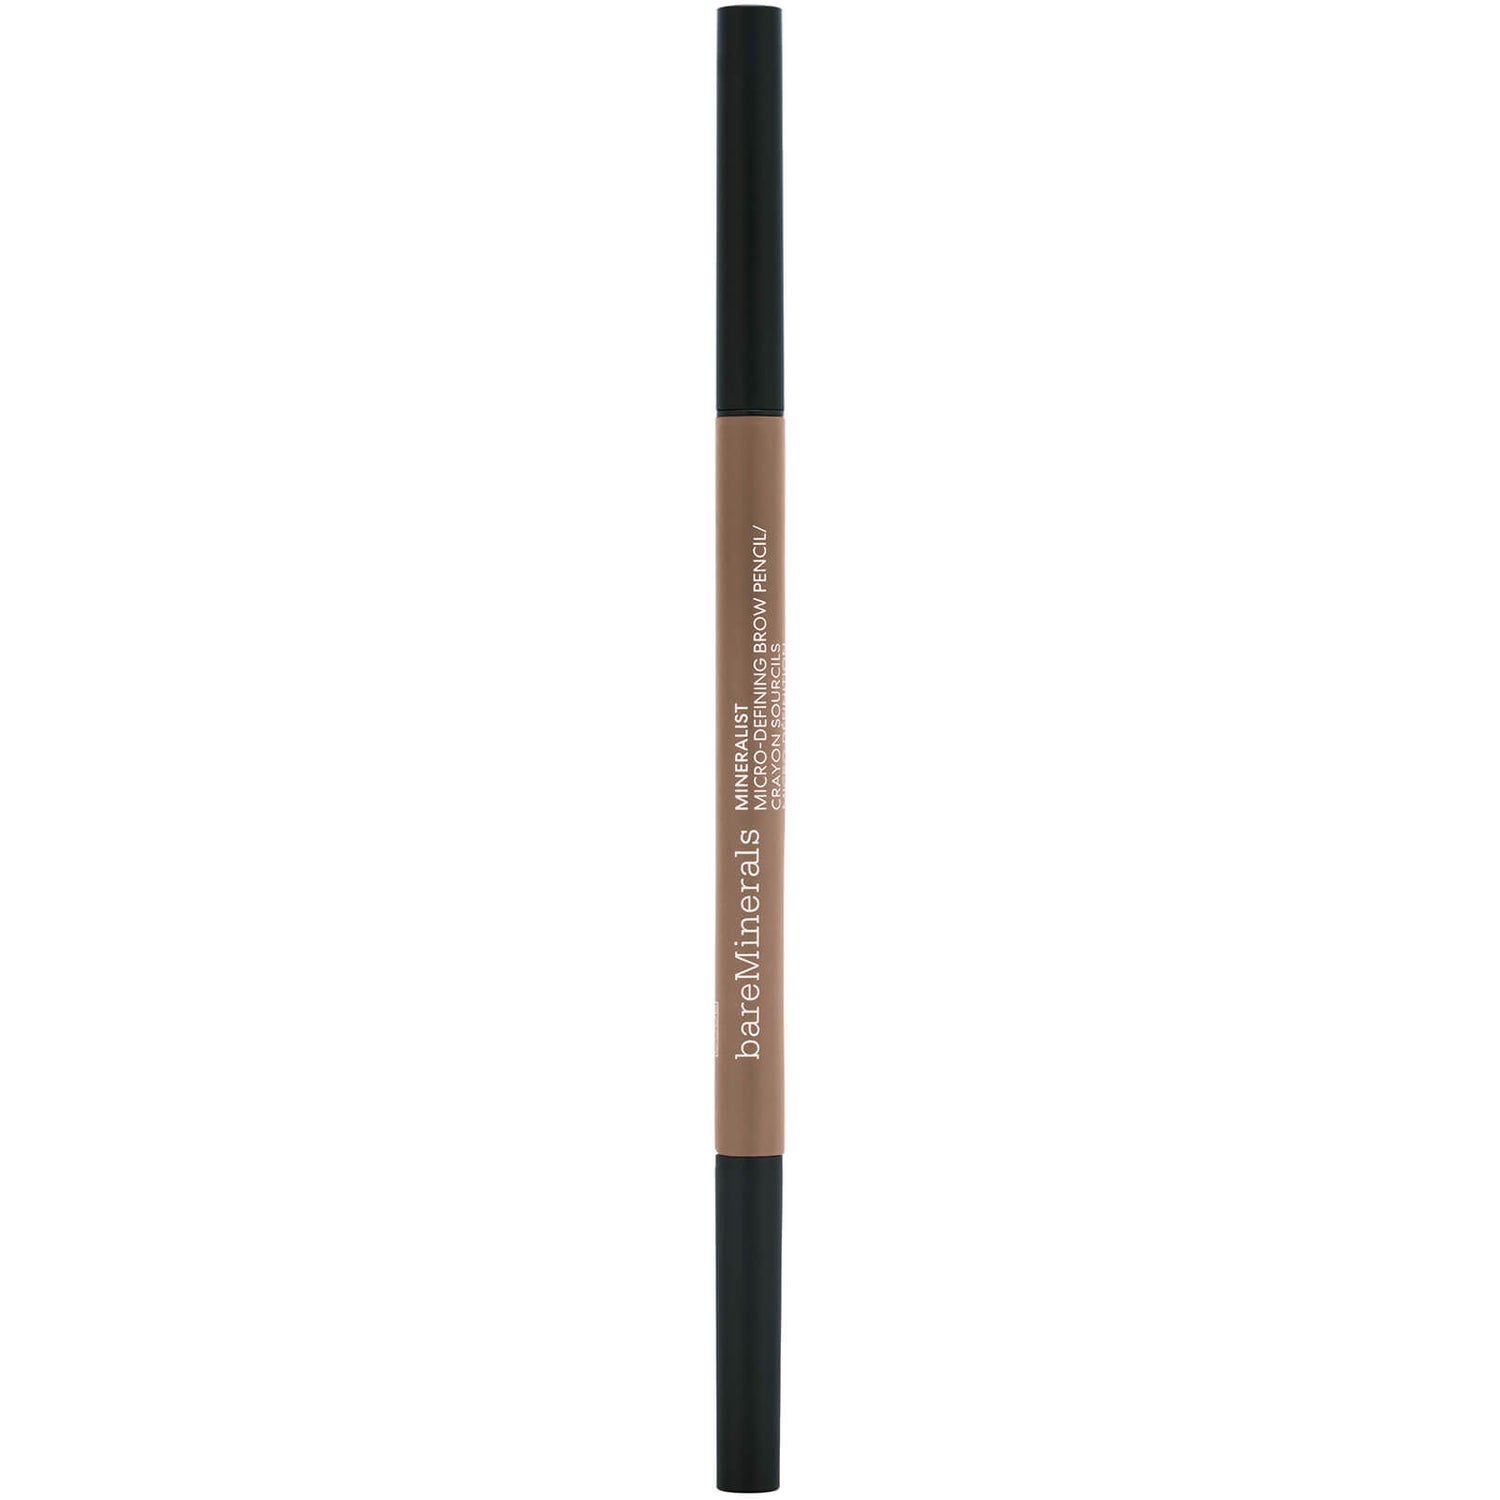 bareMinerals Mineralist MicroDefining Brow Pencil 0.08g (Various Shades)